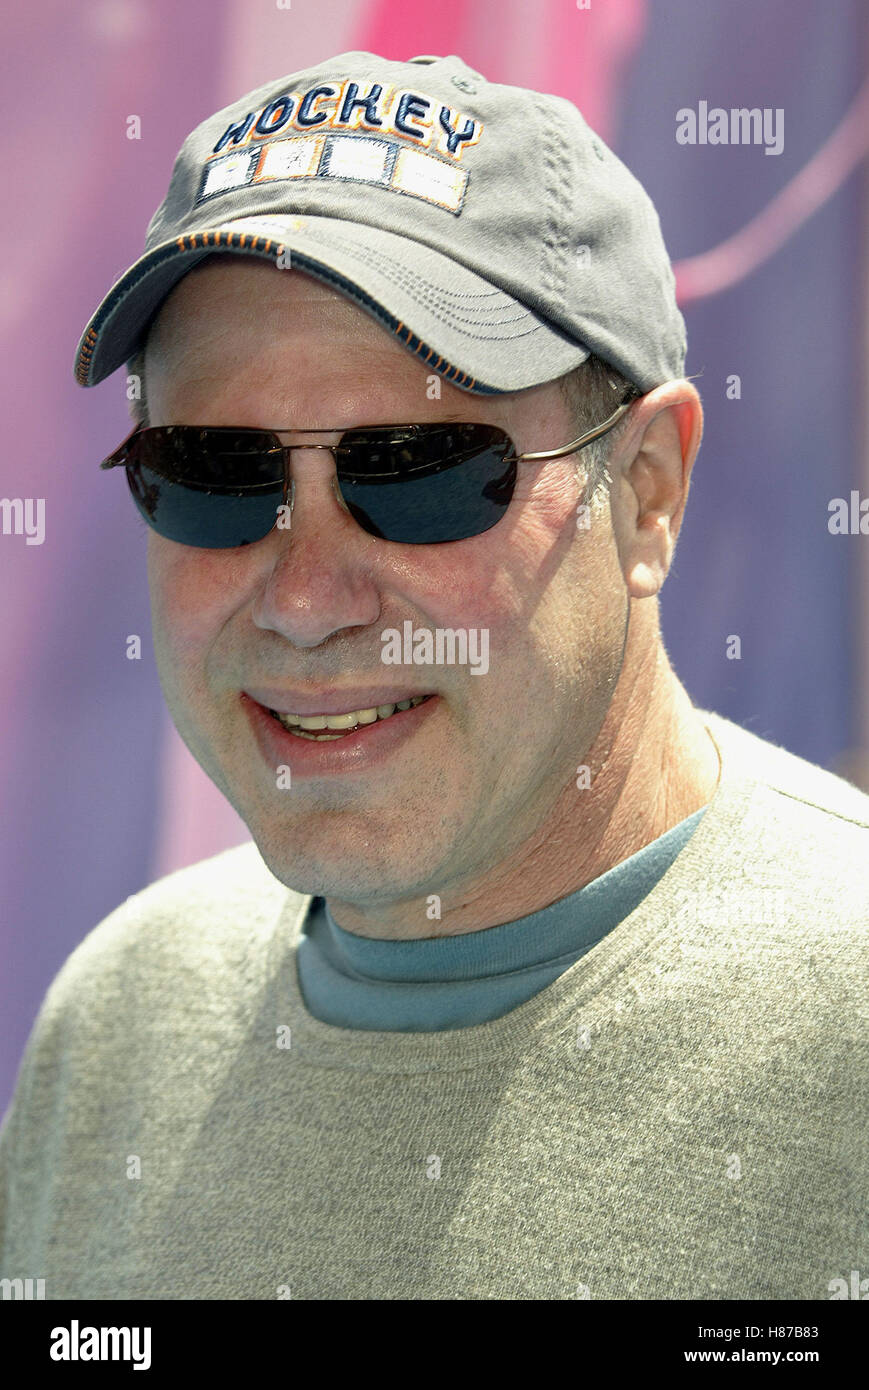 MICHAEL EISNER FINDING NEMO WORLD PREMIERE HOLLYWOOD LOS ANGELES USA 18 May 2003 Stock Photo